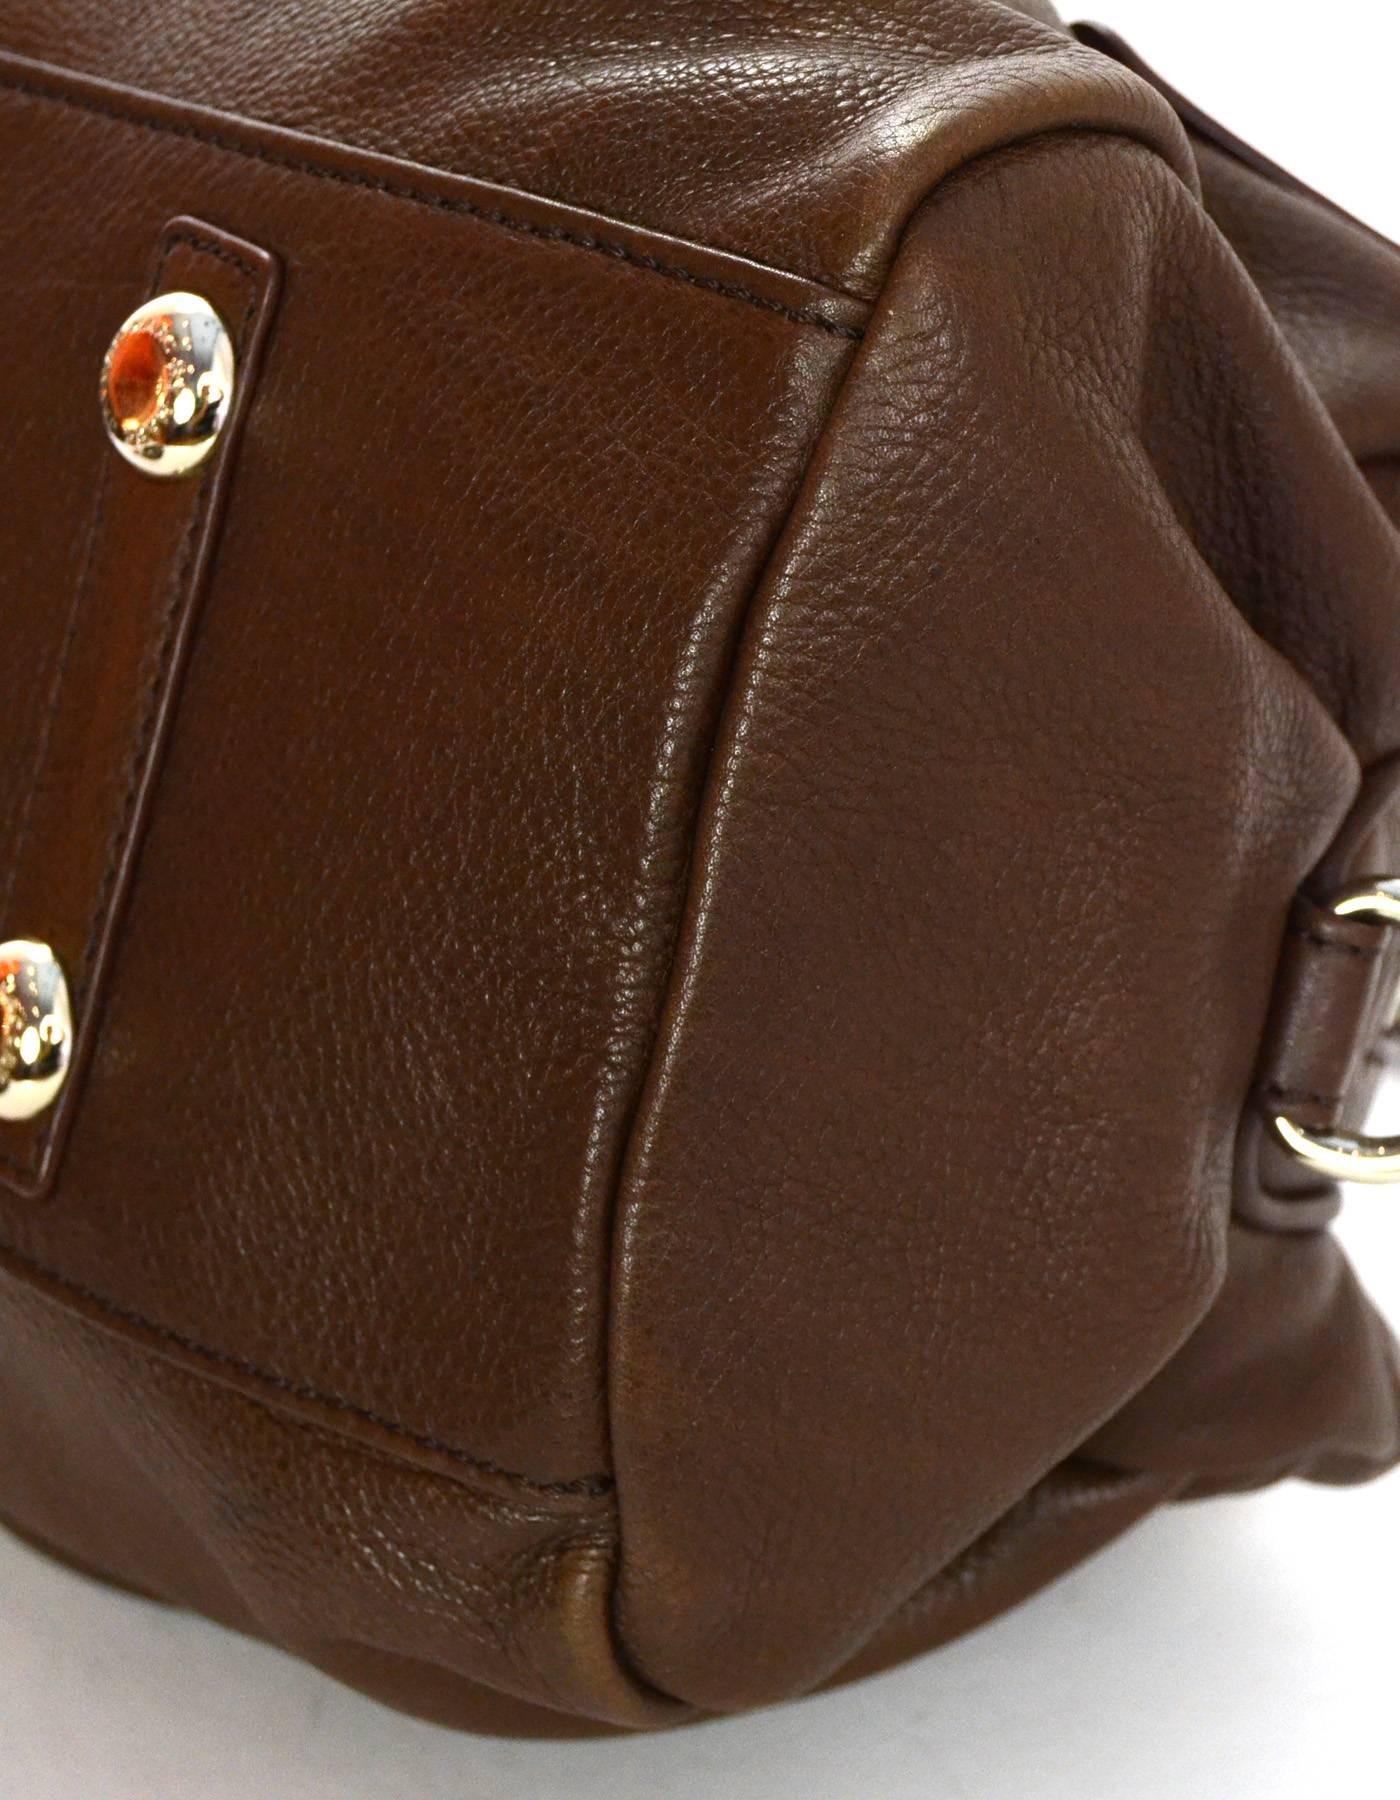 Brown Marc by Marc Jacobs Classic Q Groovee Satchel Bag